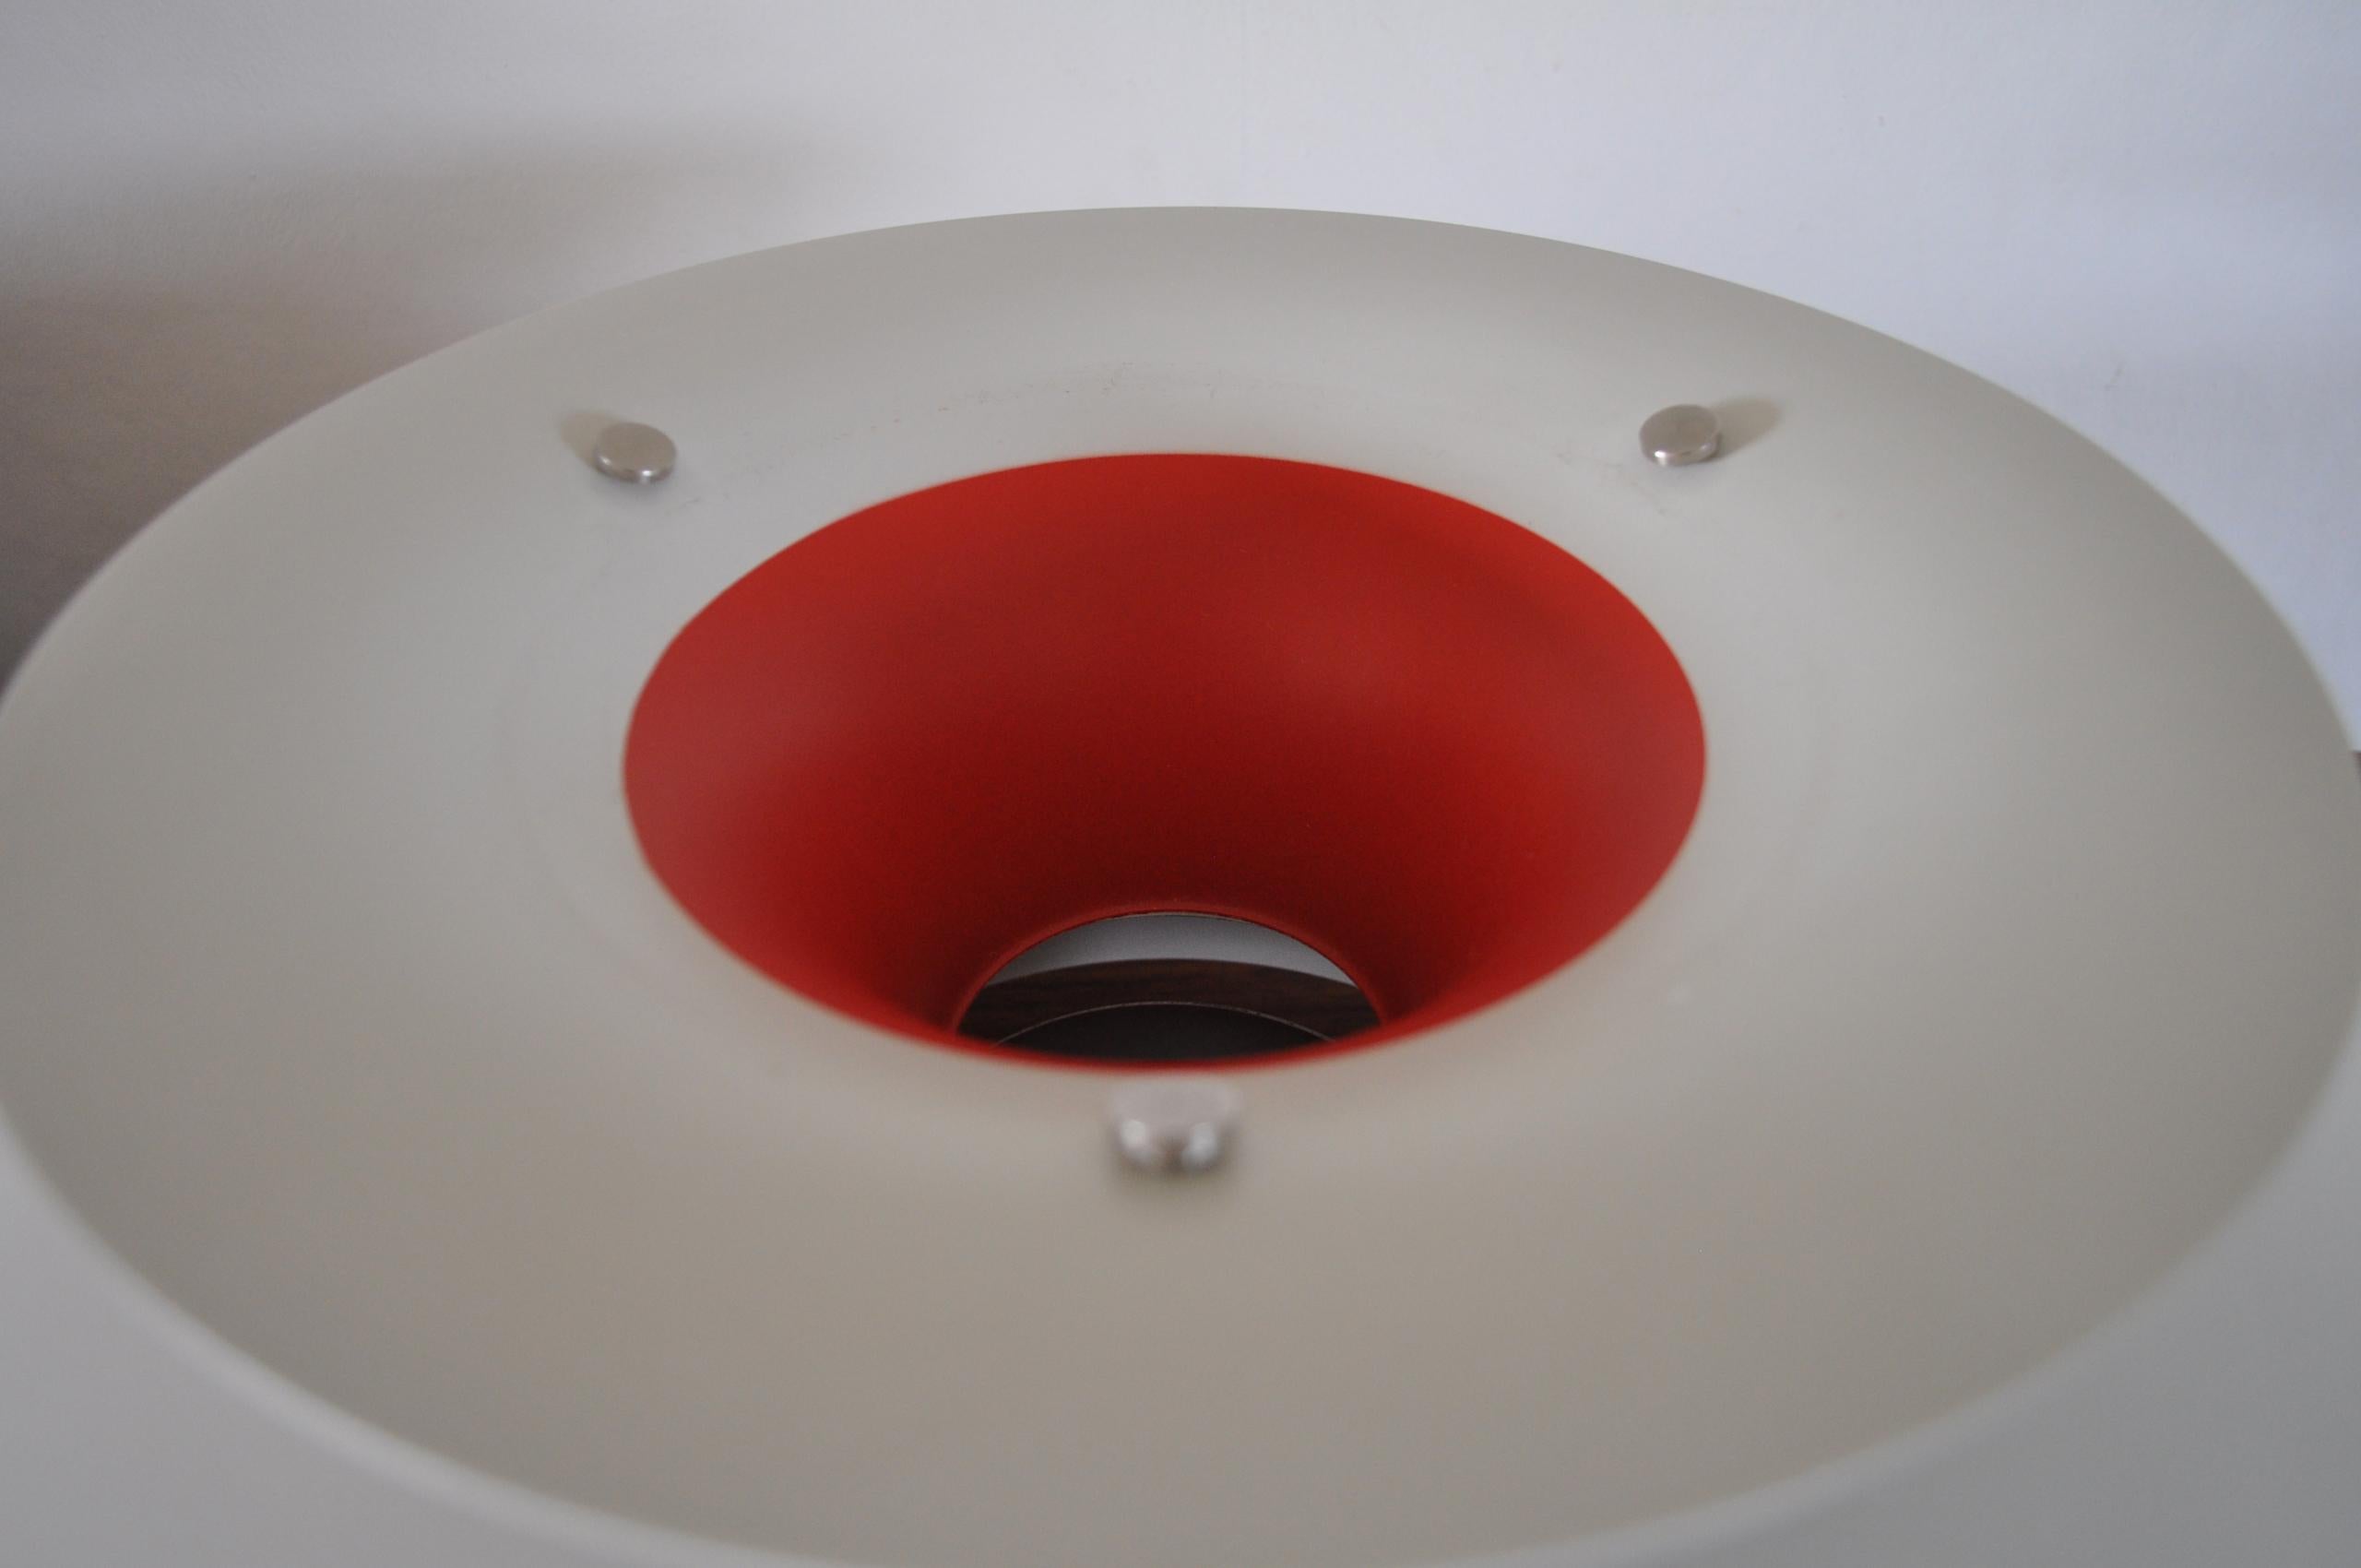 Scandinavian Modern Classic PH5, white, blue and red by Poul Henningsen for Louis Poulsen